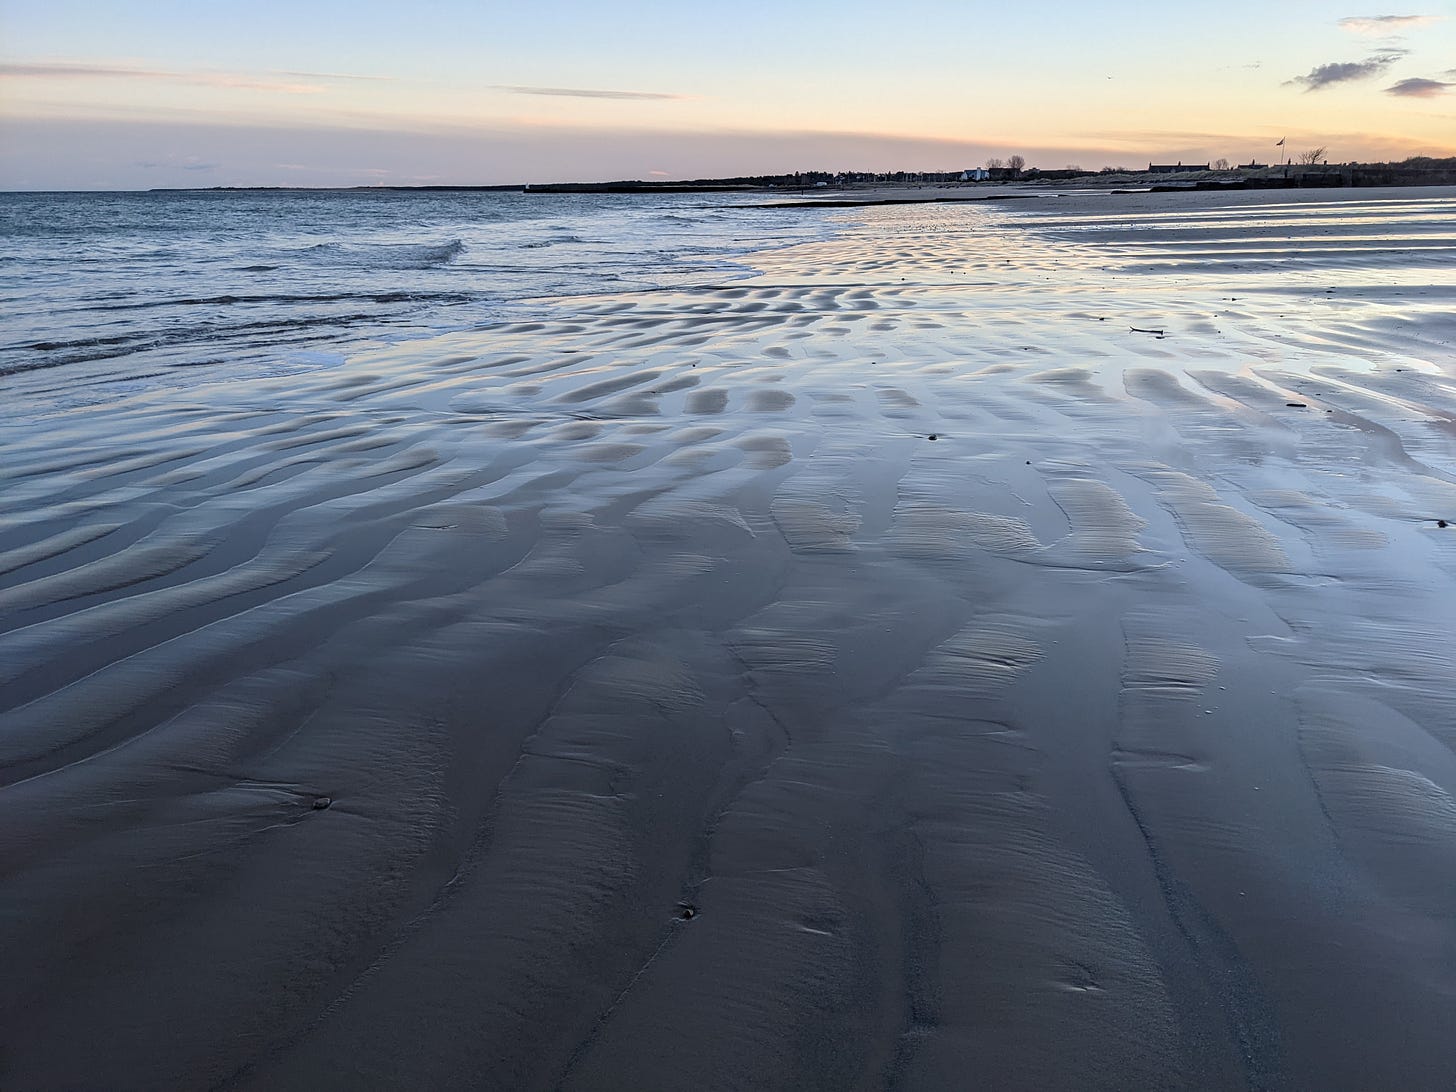 Wavy lines in the wet sand at low tide with the sunrising in the distance